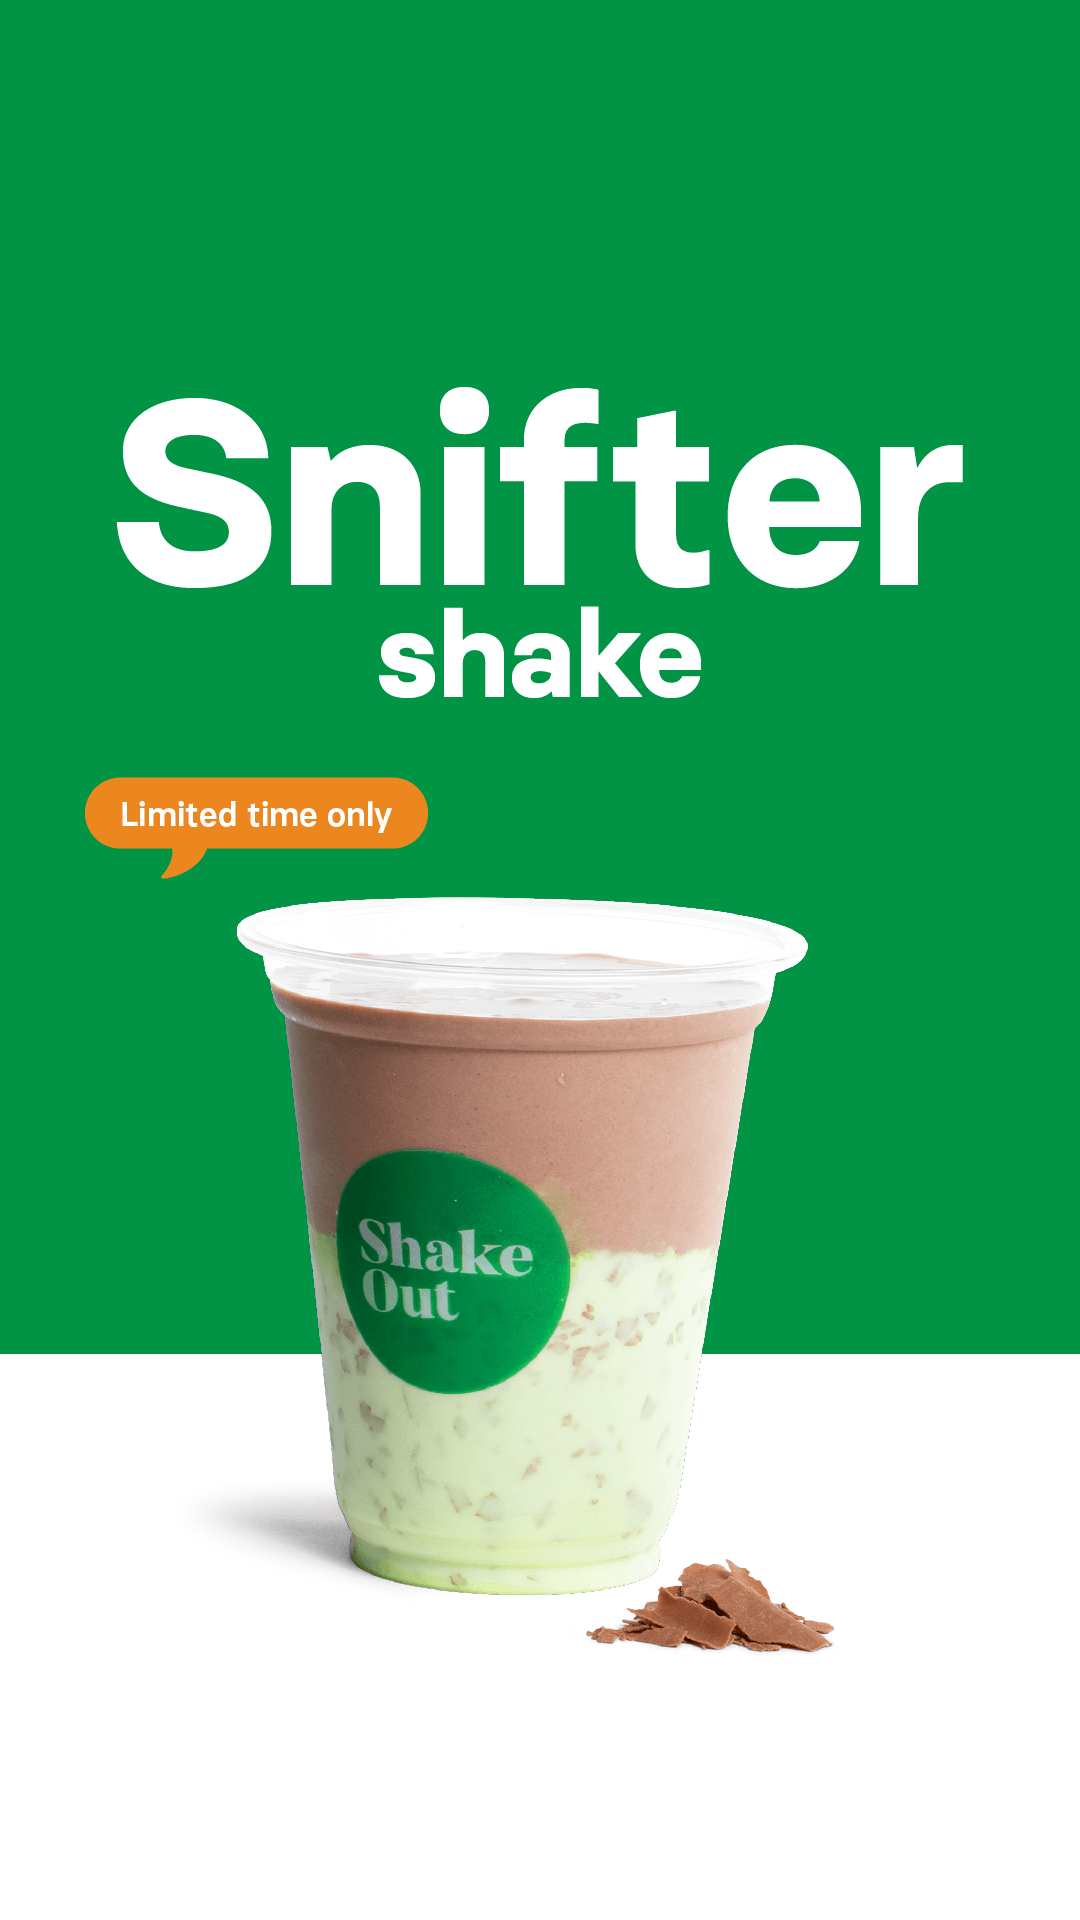 SO_Snifter Shake_IGS2.png